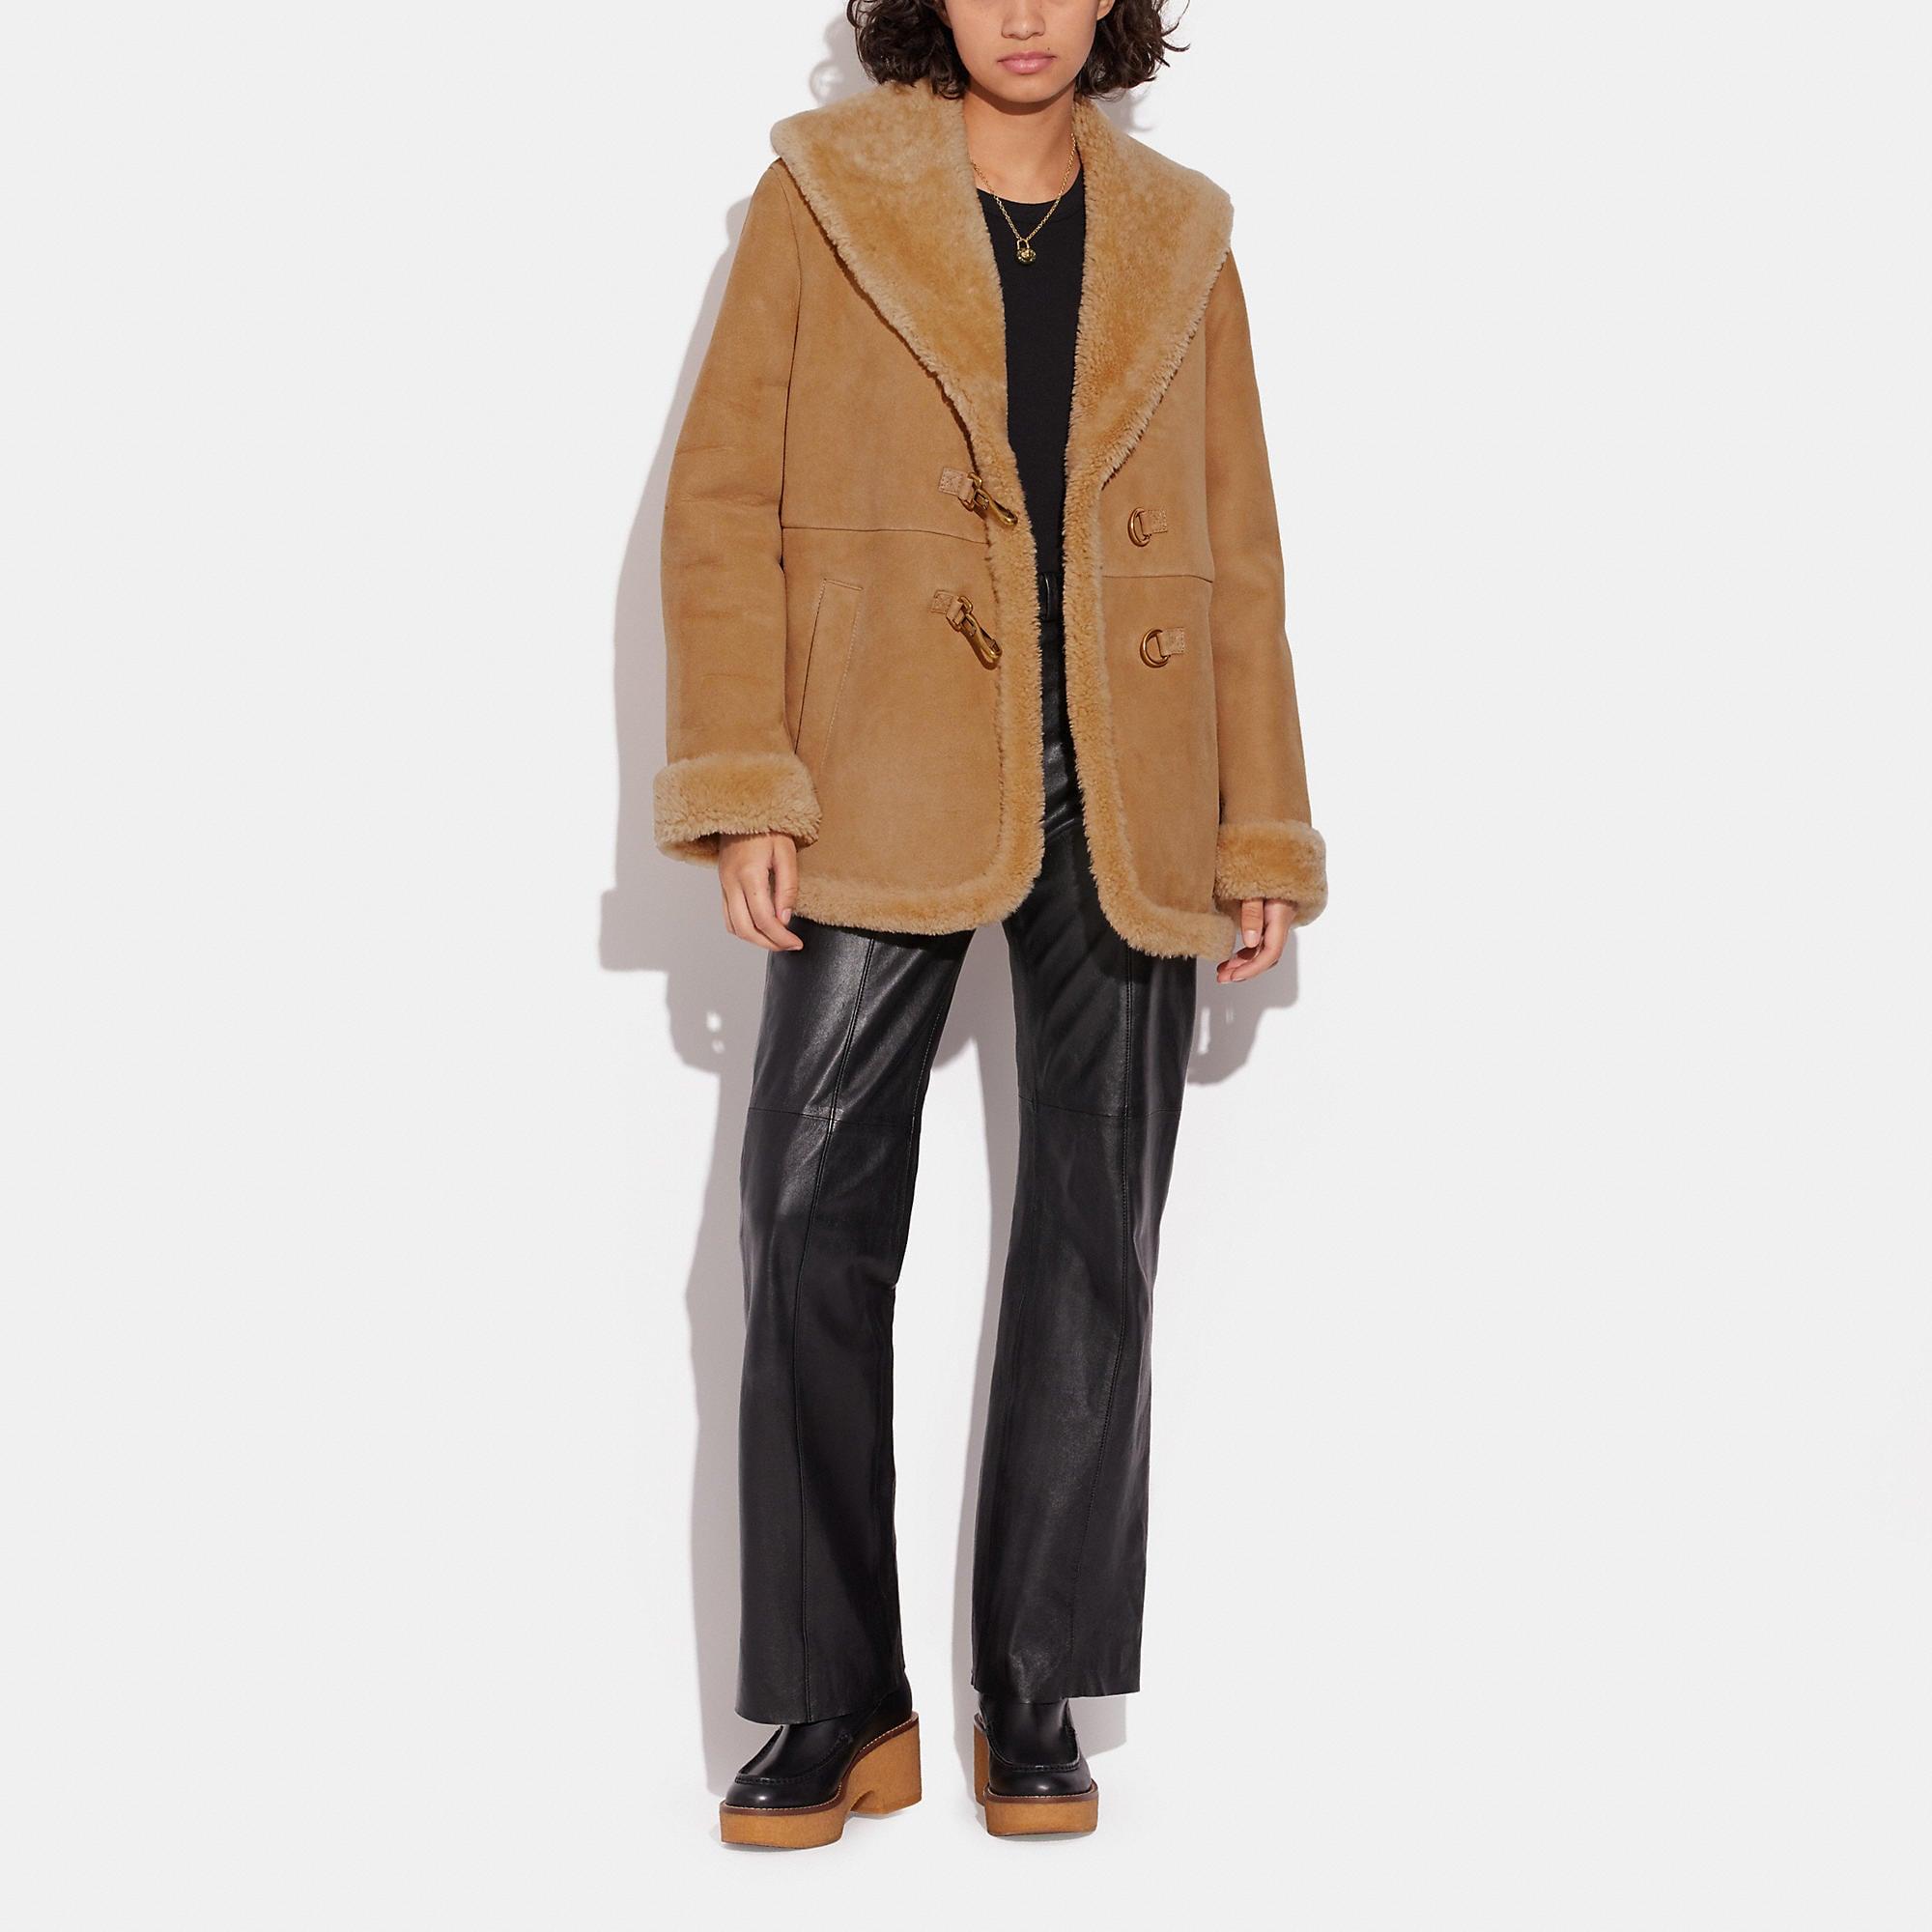 Coach Outlet Shawl Shearling Coat in Brown | Lyst